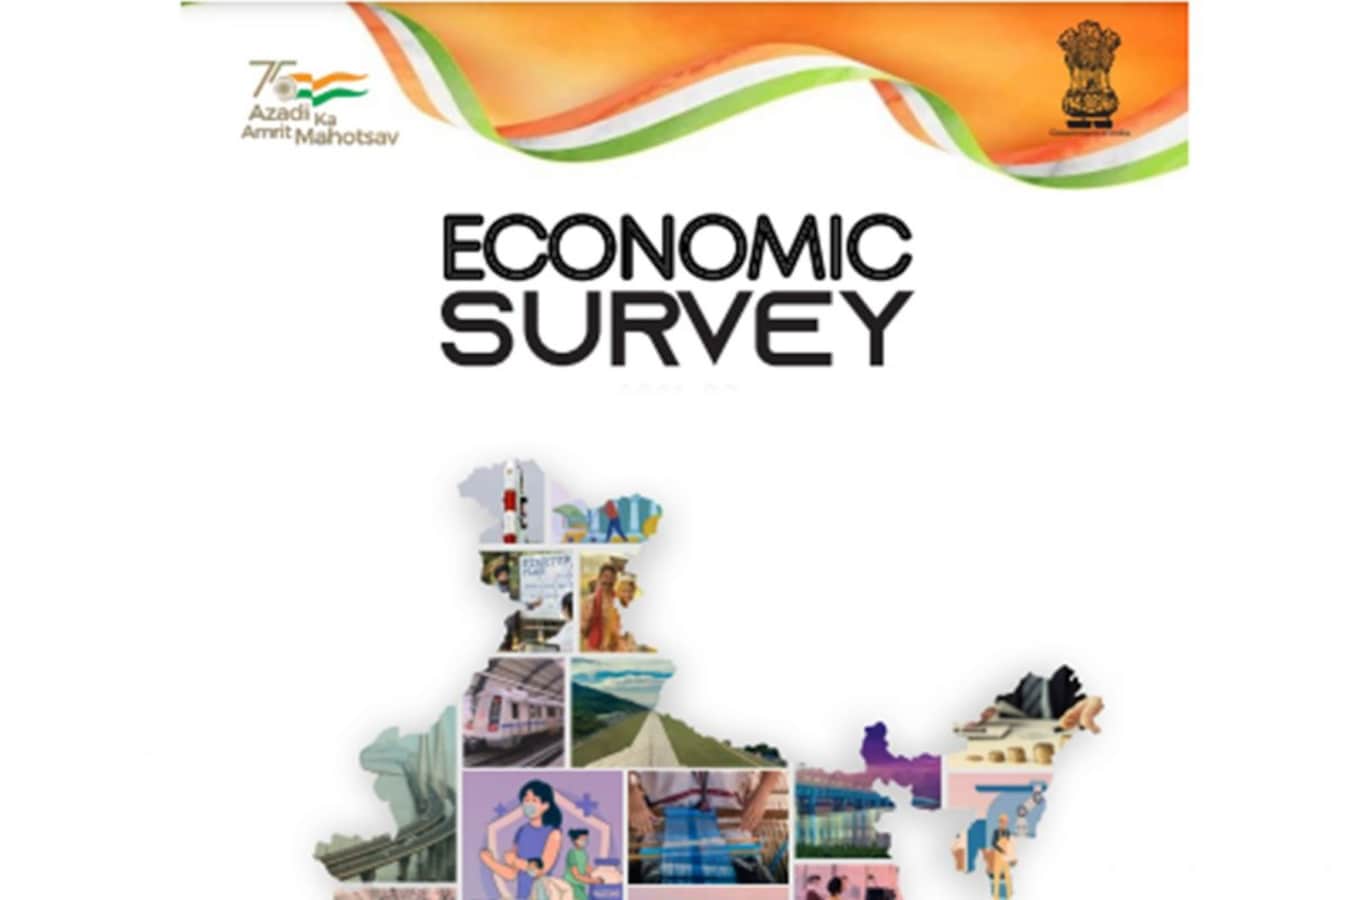 Economic Survey 2022-23: When Will It Be Presented? Know Where To Watch Live Streaming